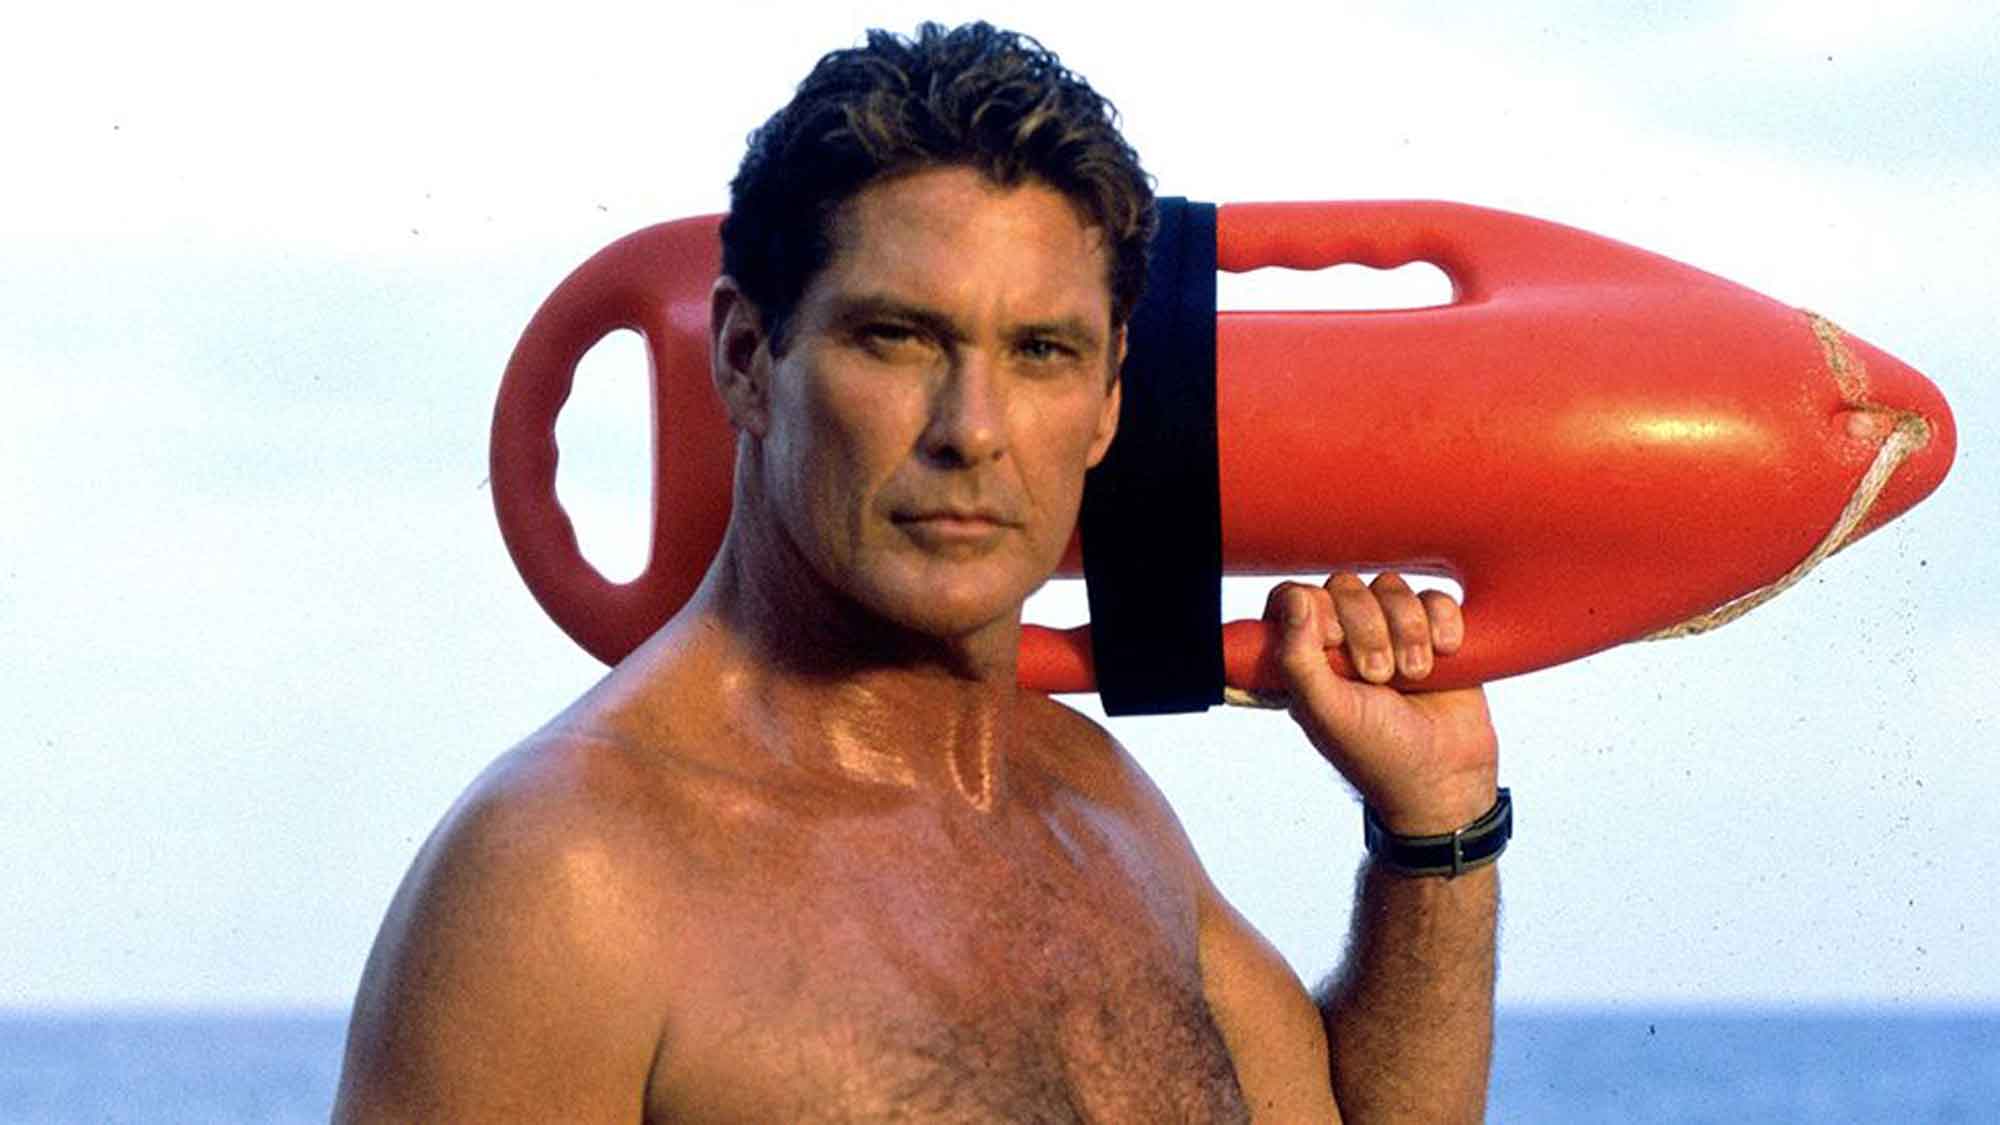 Was Hasselhoff Drunk Eating Video Just A Publicity Stunt?